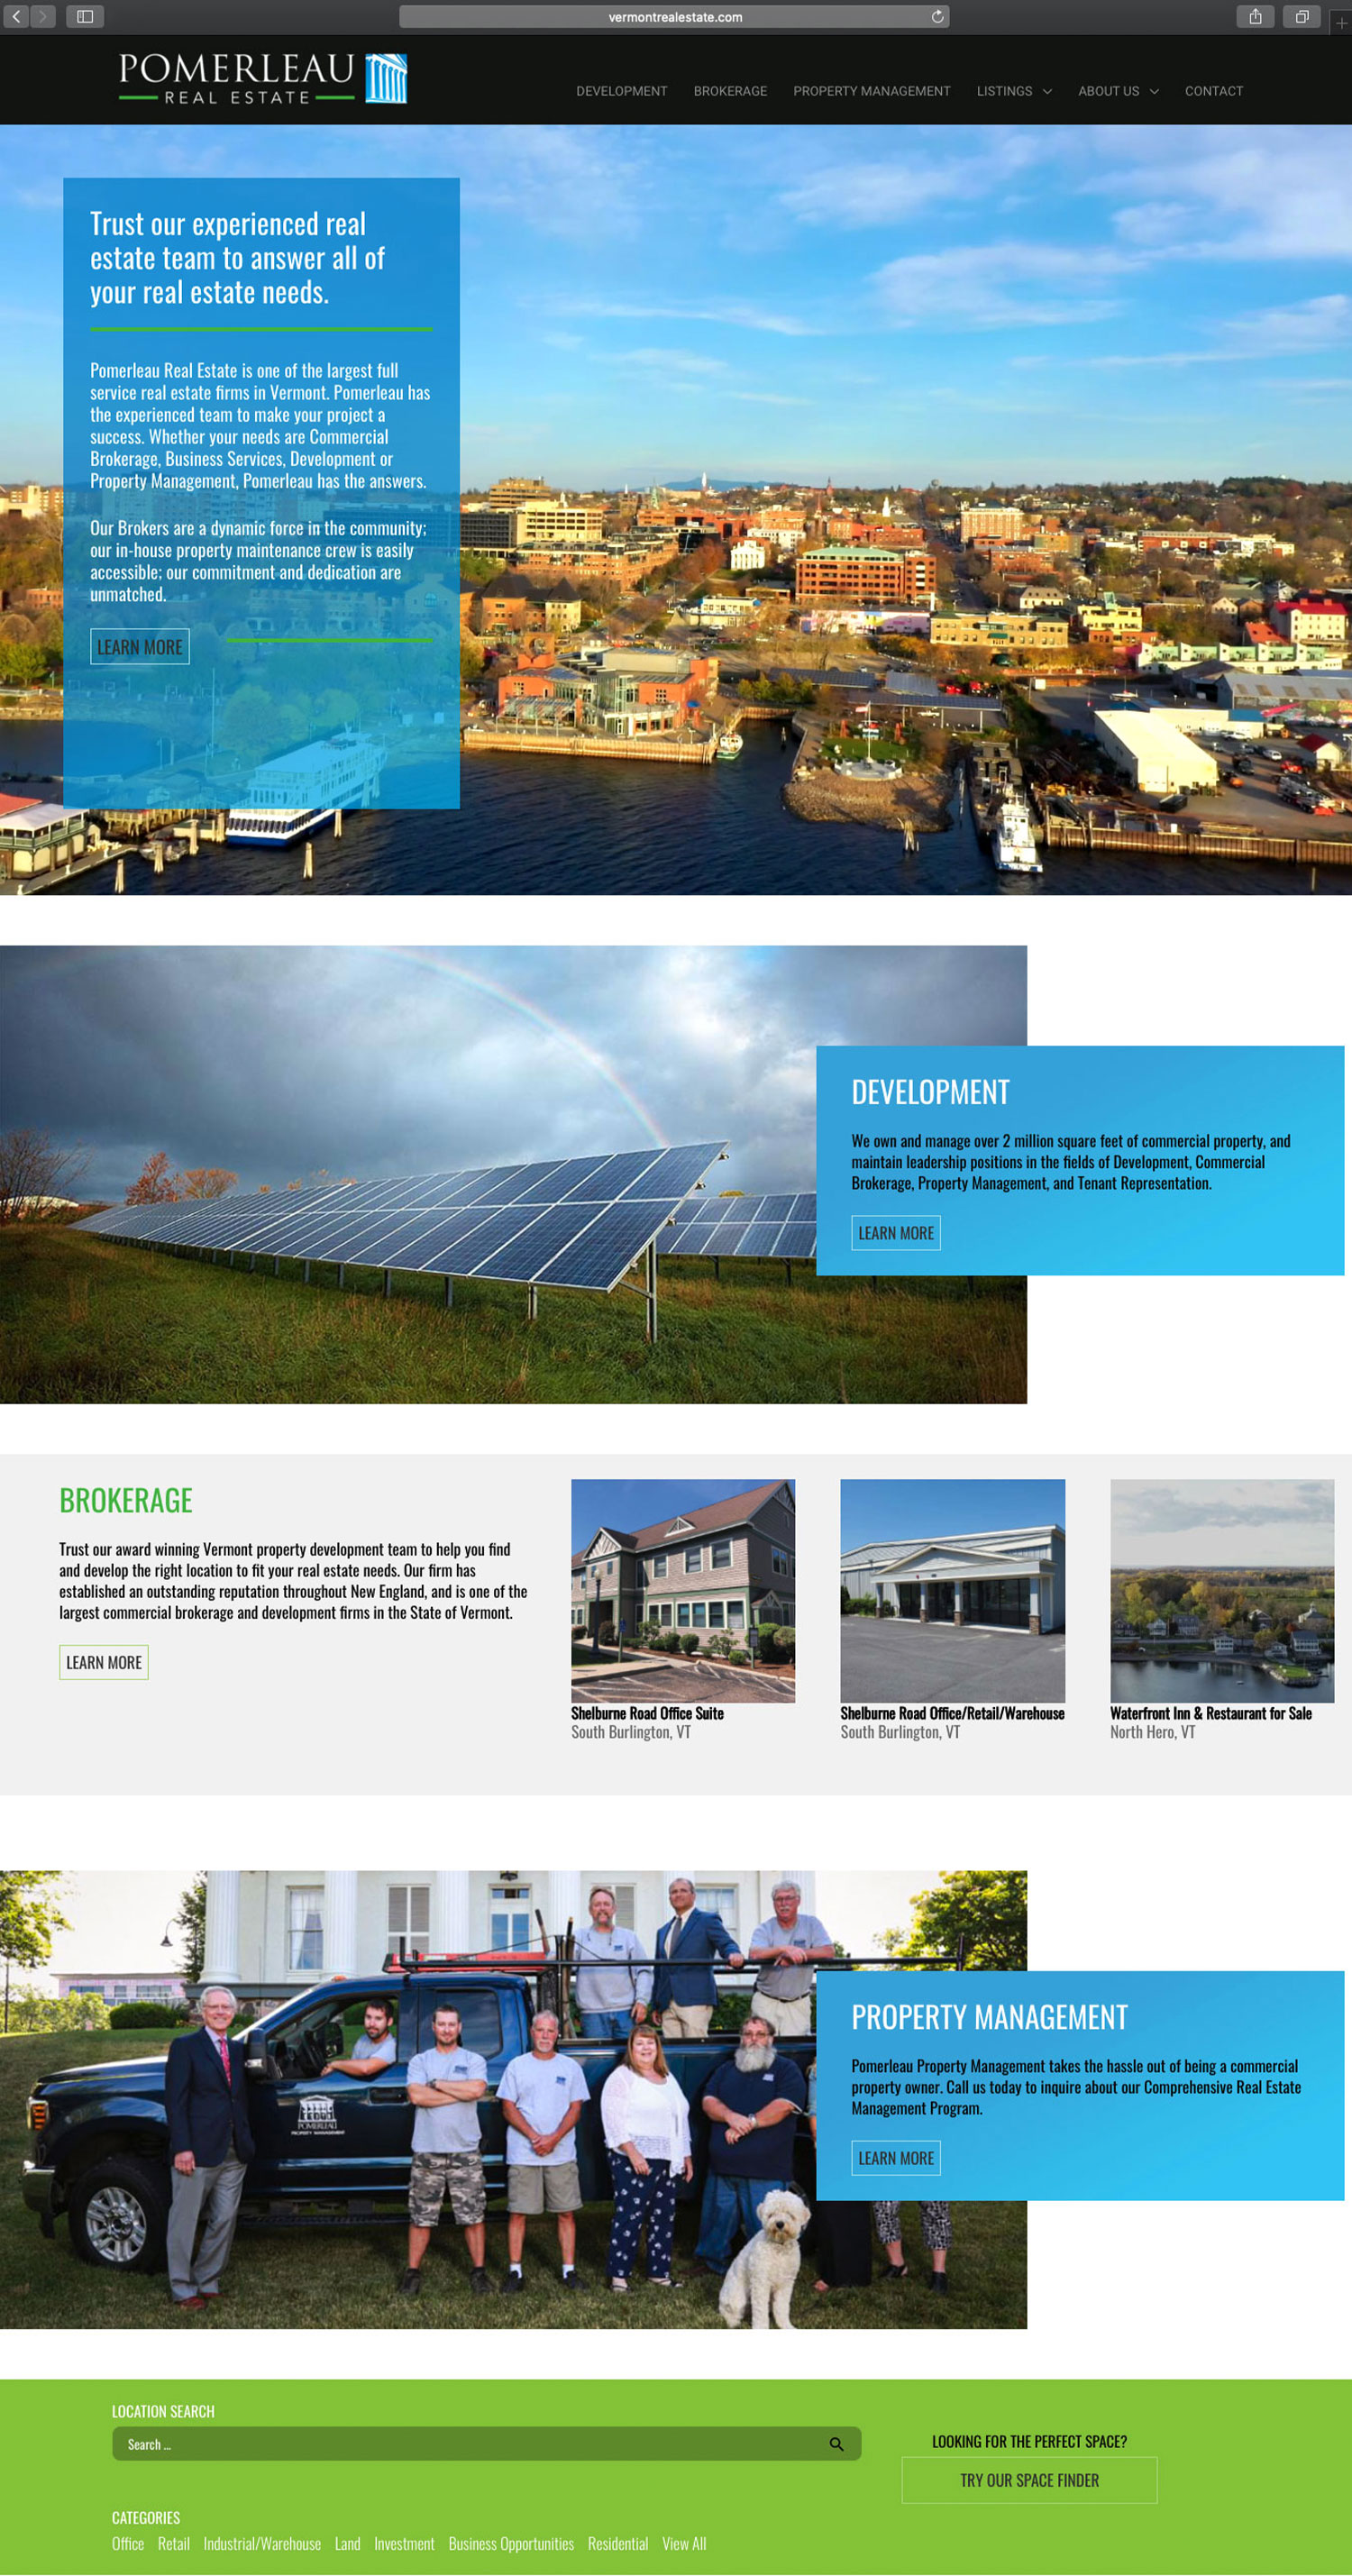 Website design and website development for Pomerleau Real Estate - homepage view.